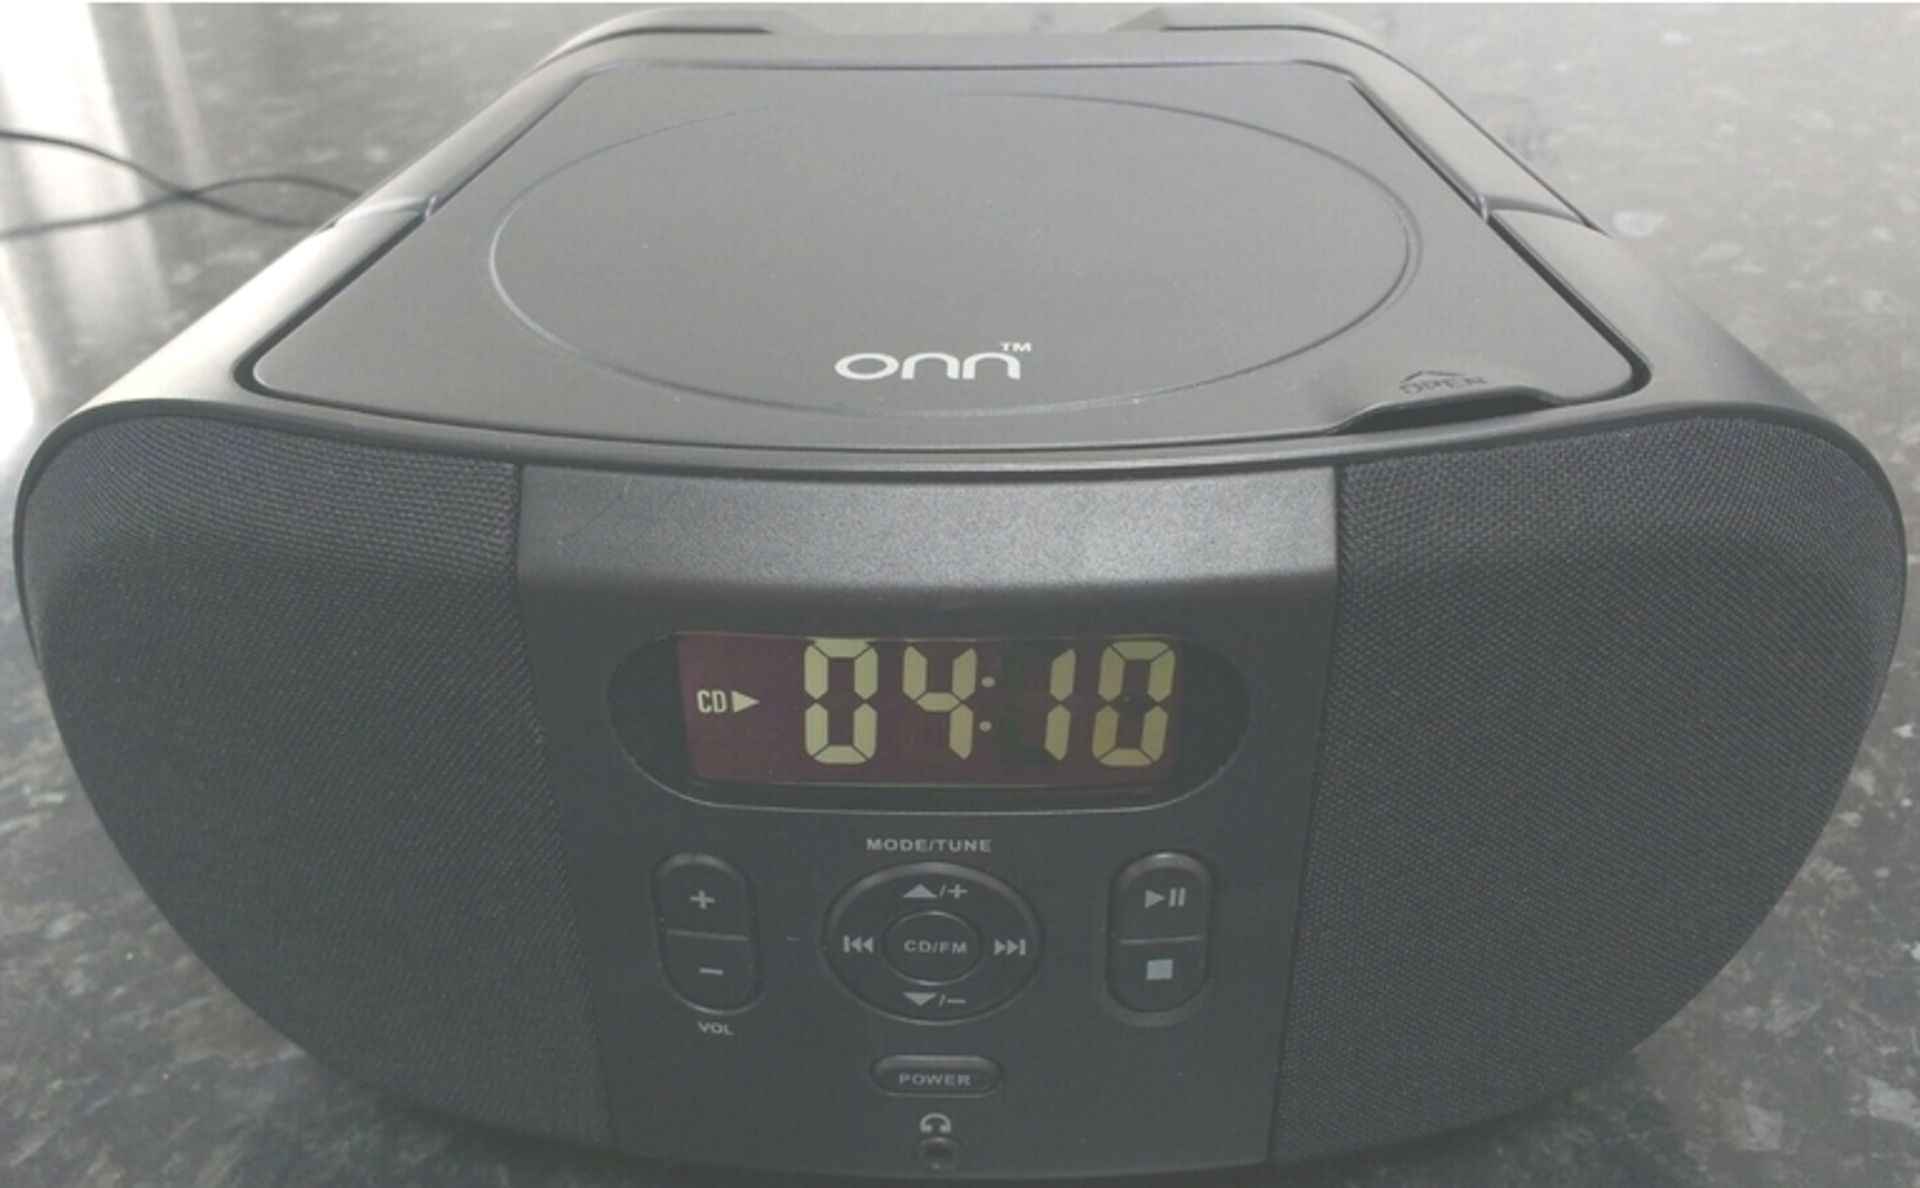 4 x onn portable cd player boombox with digital fm radio - Image 2 of 5